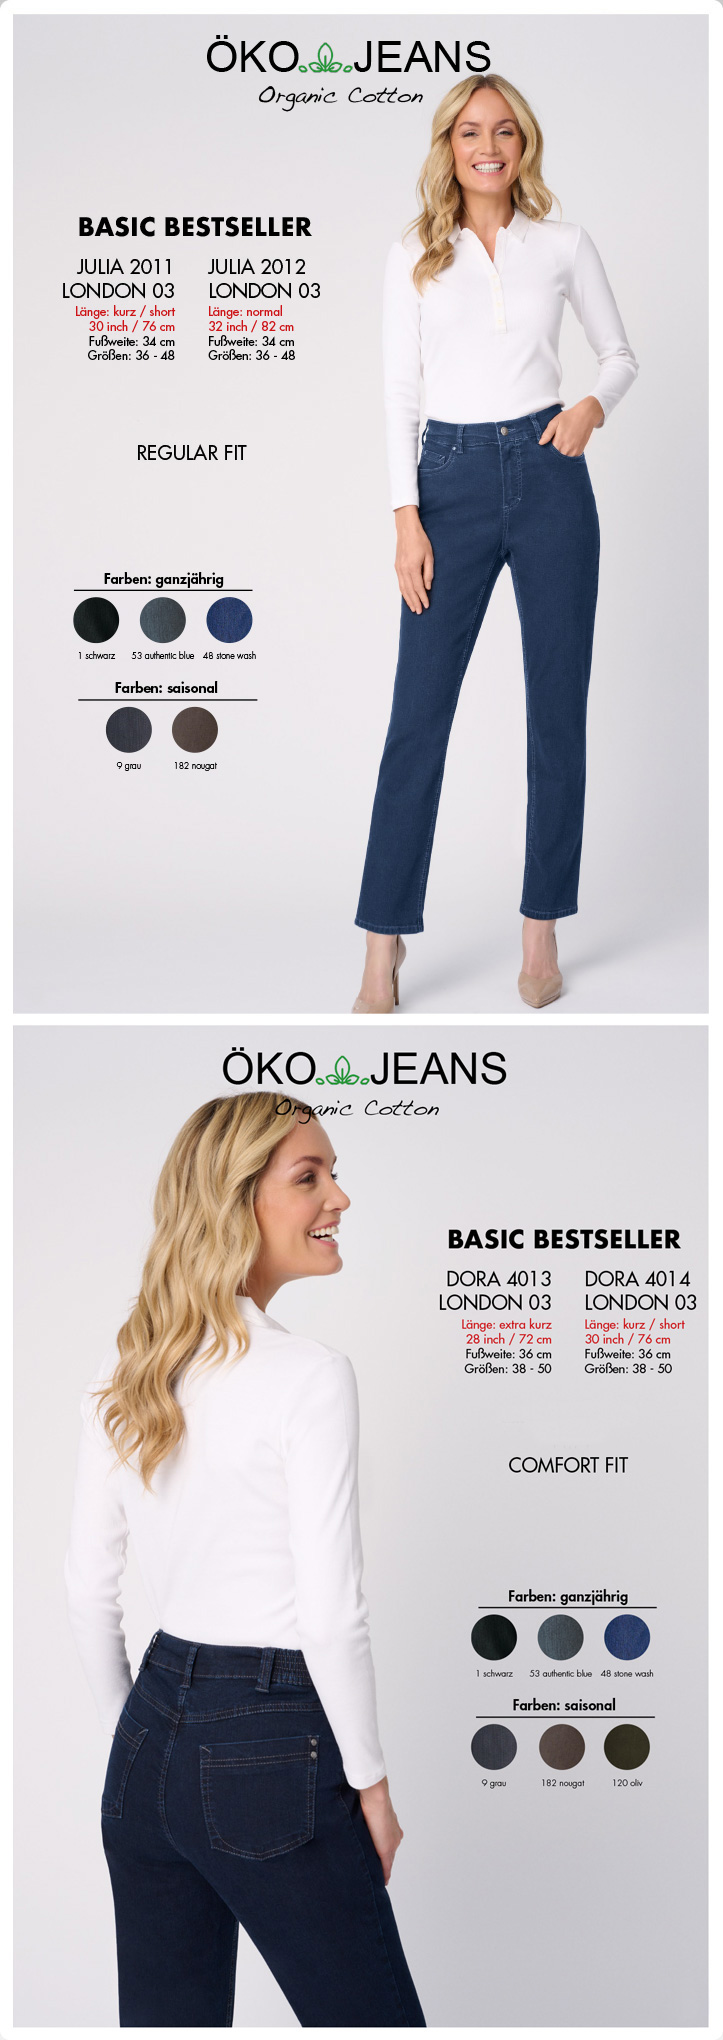 Lave Uddybe volleyball Öko Jeans - ANNA MONTANA - The specialist of trousers